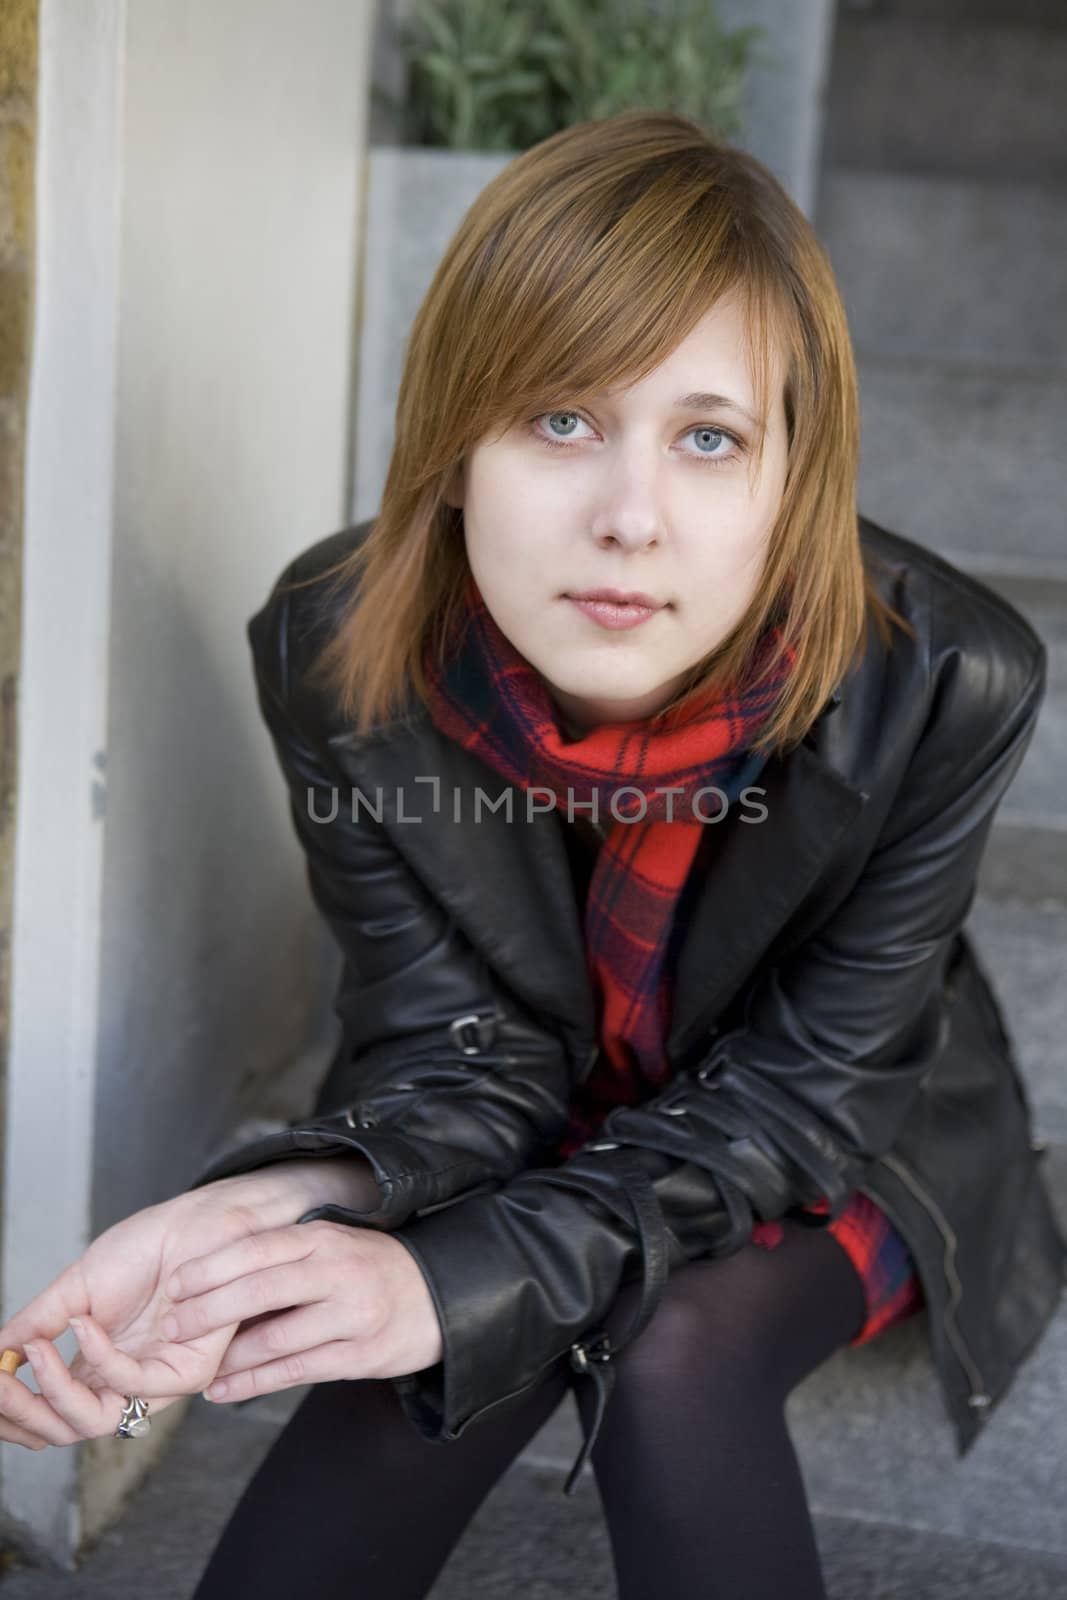 young attractive girl with red hair sitting on street, waiting